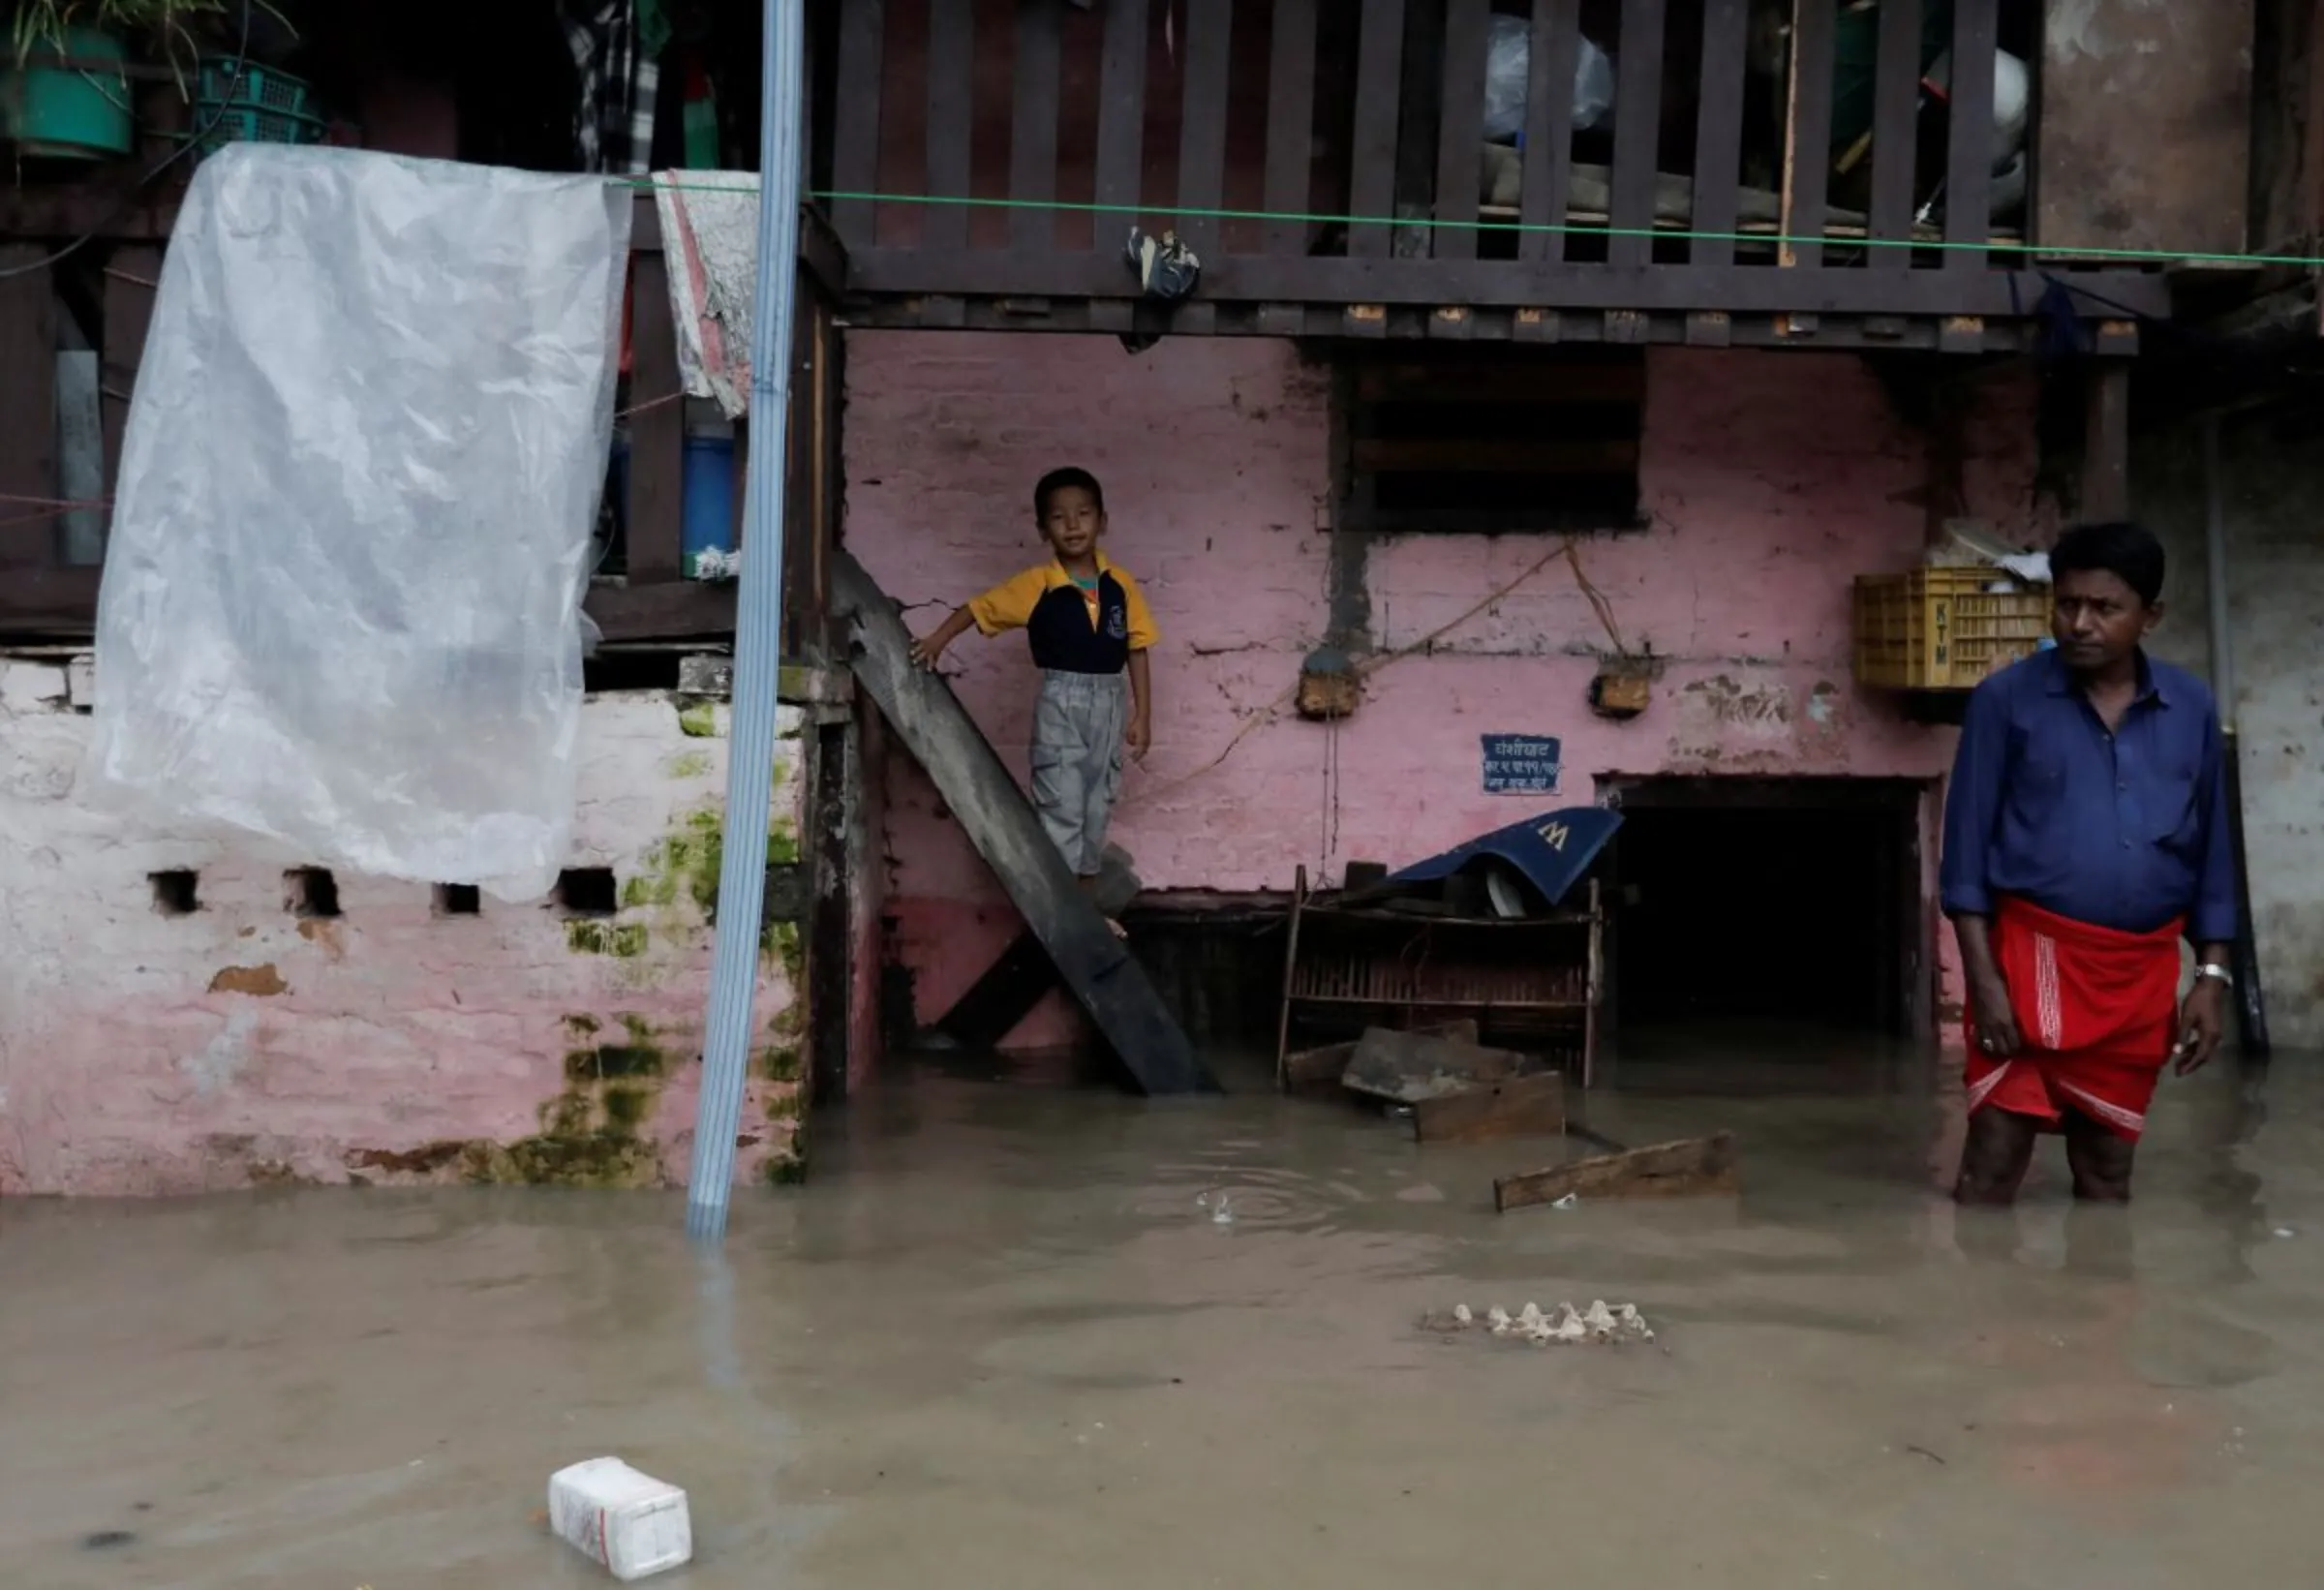 A boy stands on an entrance of his house in an area flooded by the overflowing Bagmati river following heavy rains, in Kathmandu, Nepal August 8, 2023